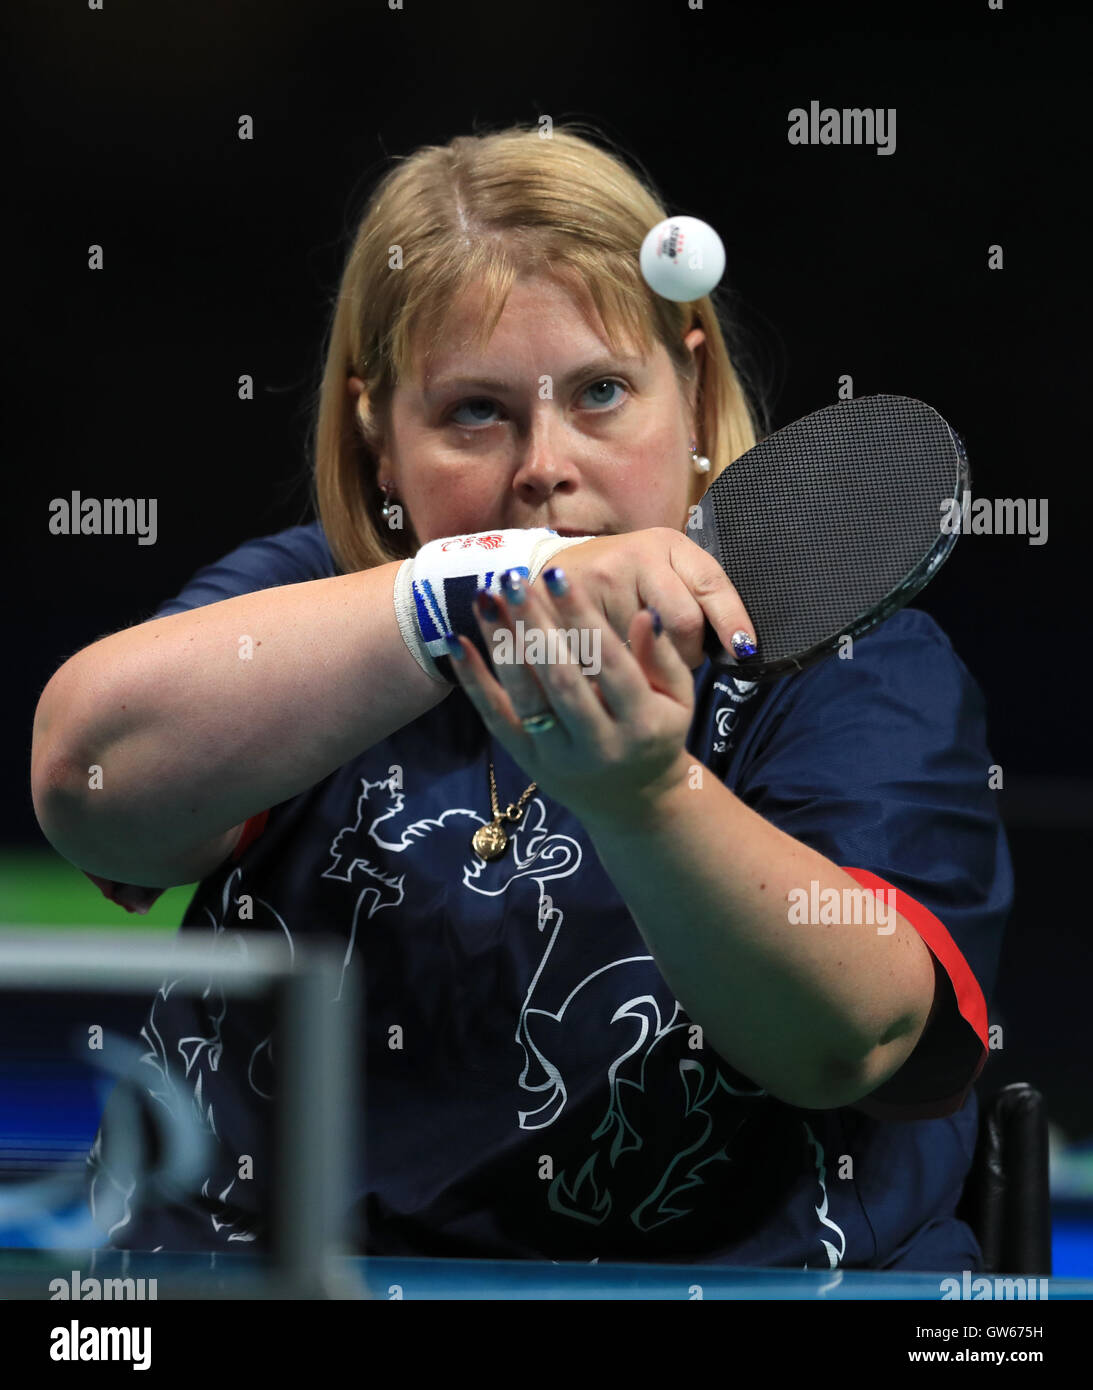 Great Britain's Susan Gilroy competes in the the class four Women's Singles Table Tennis bronze Medal Match, during the fifth day of the 2016 Rio Paralympic Games in Rio de Janeiro, Brazil. Stock Photo